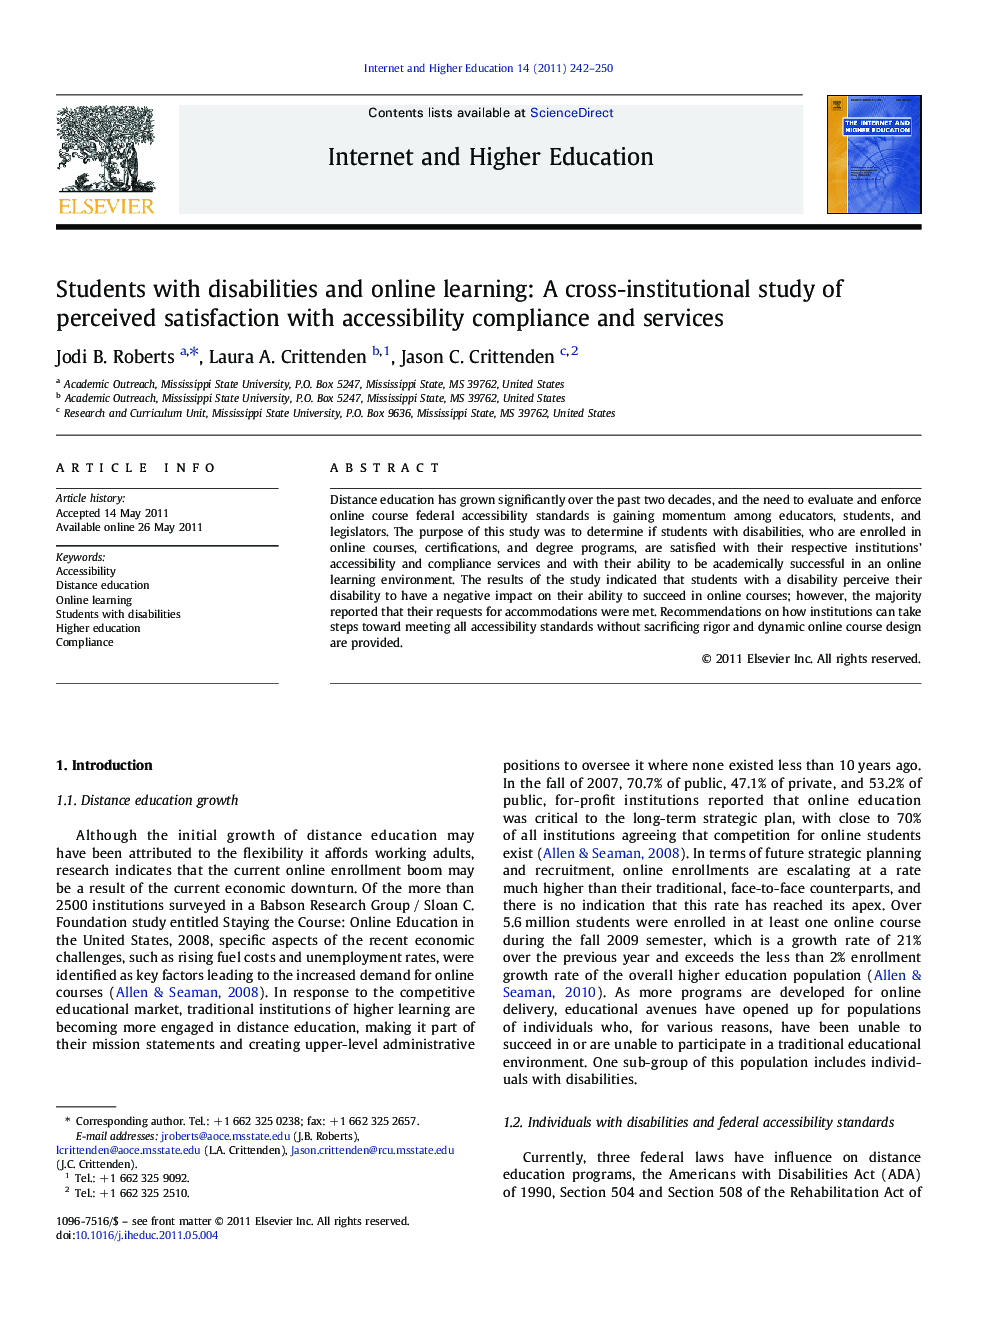 Students with disabilities and online learning: A cross-institutional study of perceived satisfaction with accessibility compliance and services